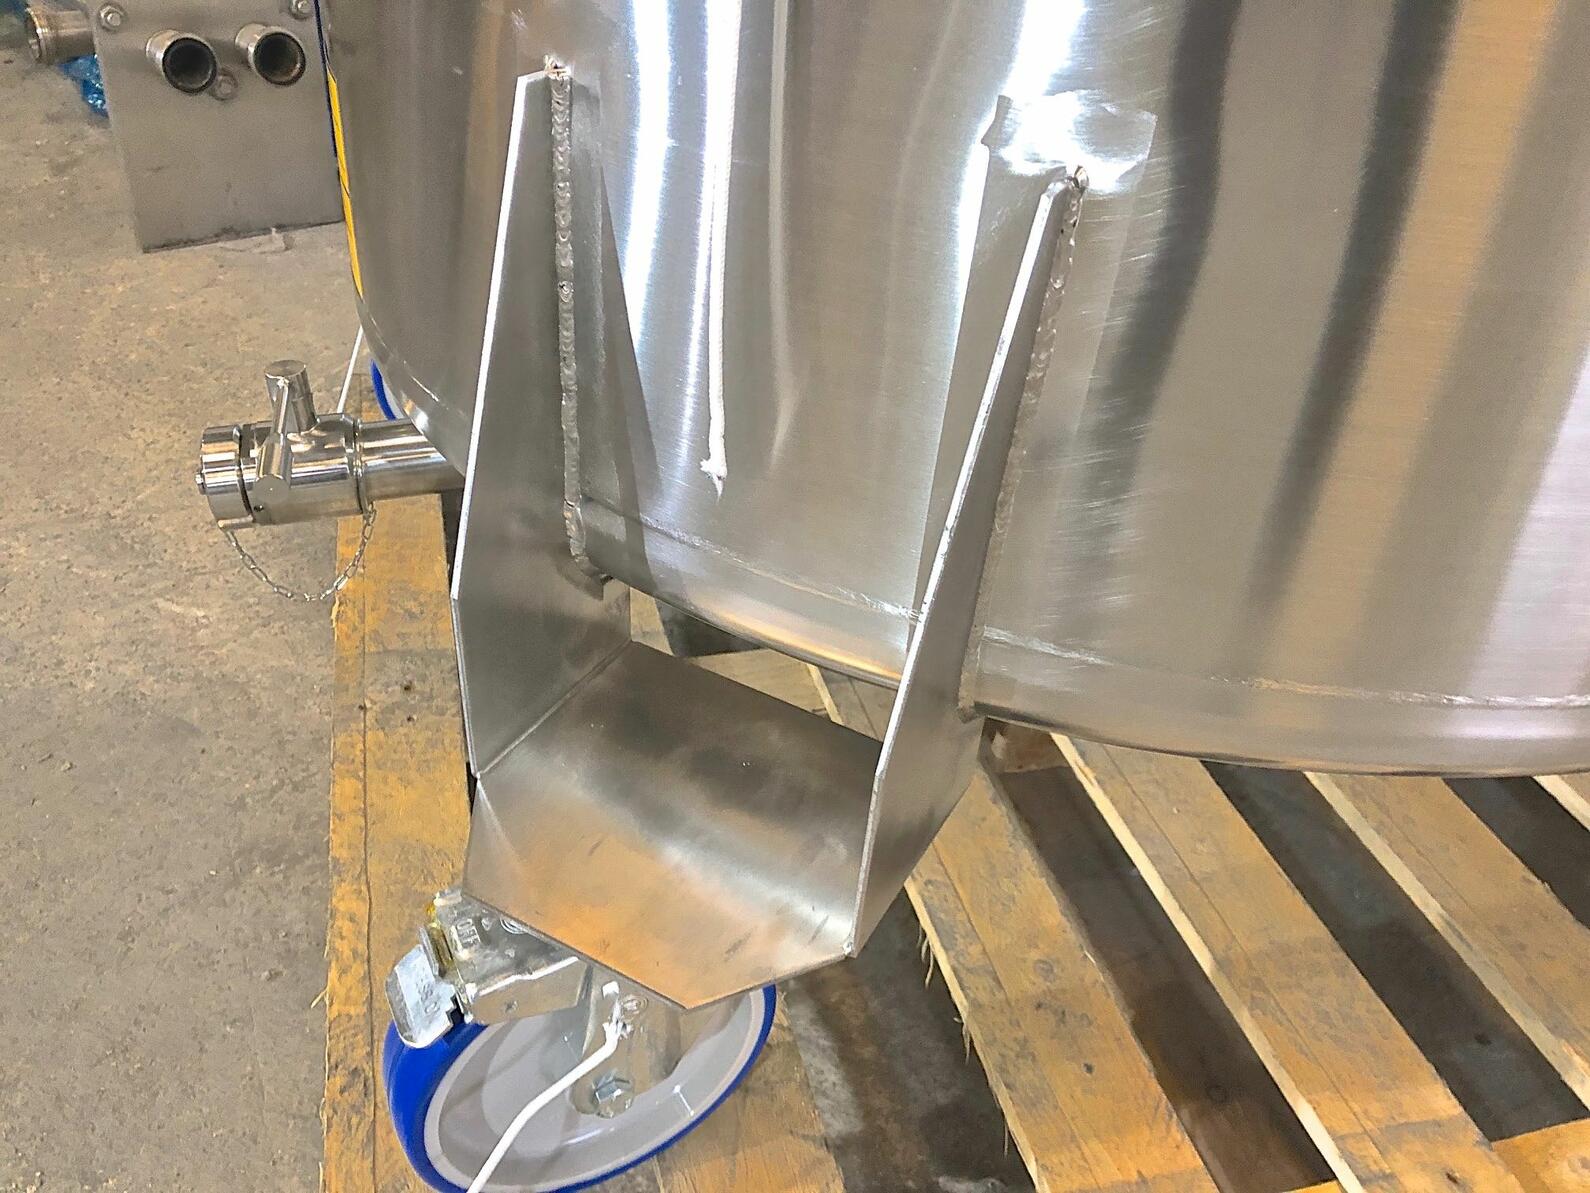 316 stainless steel tank - Model SCL1000